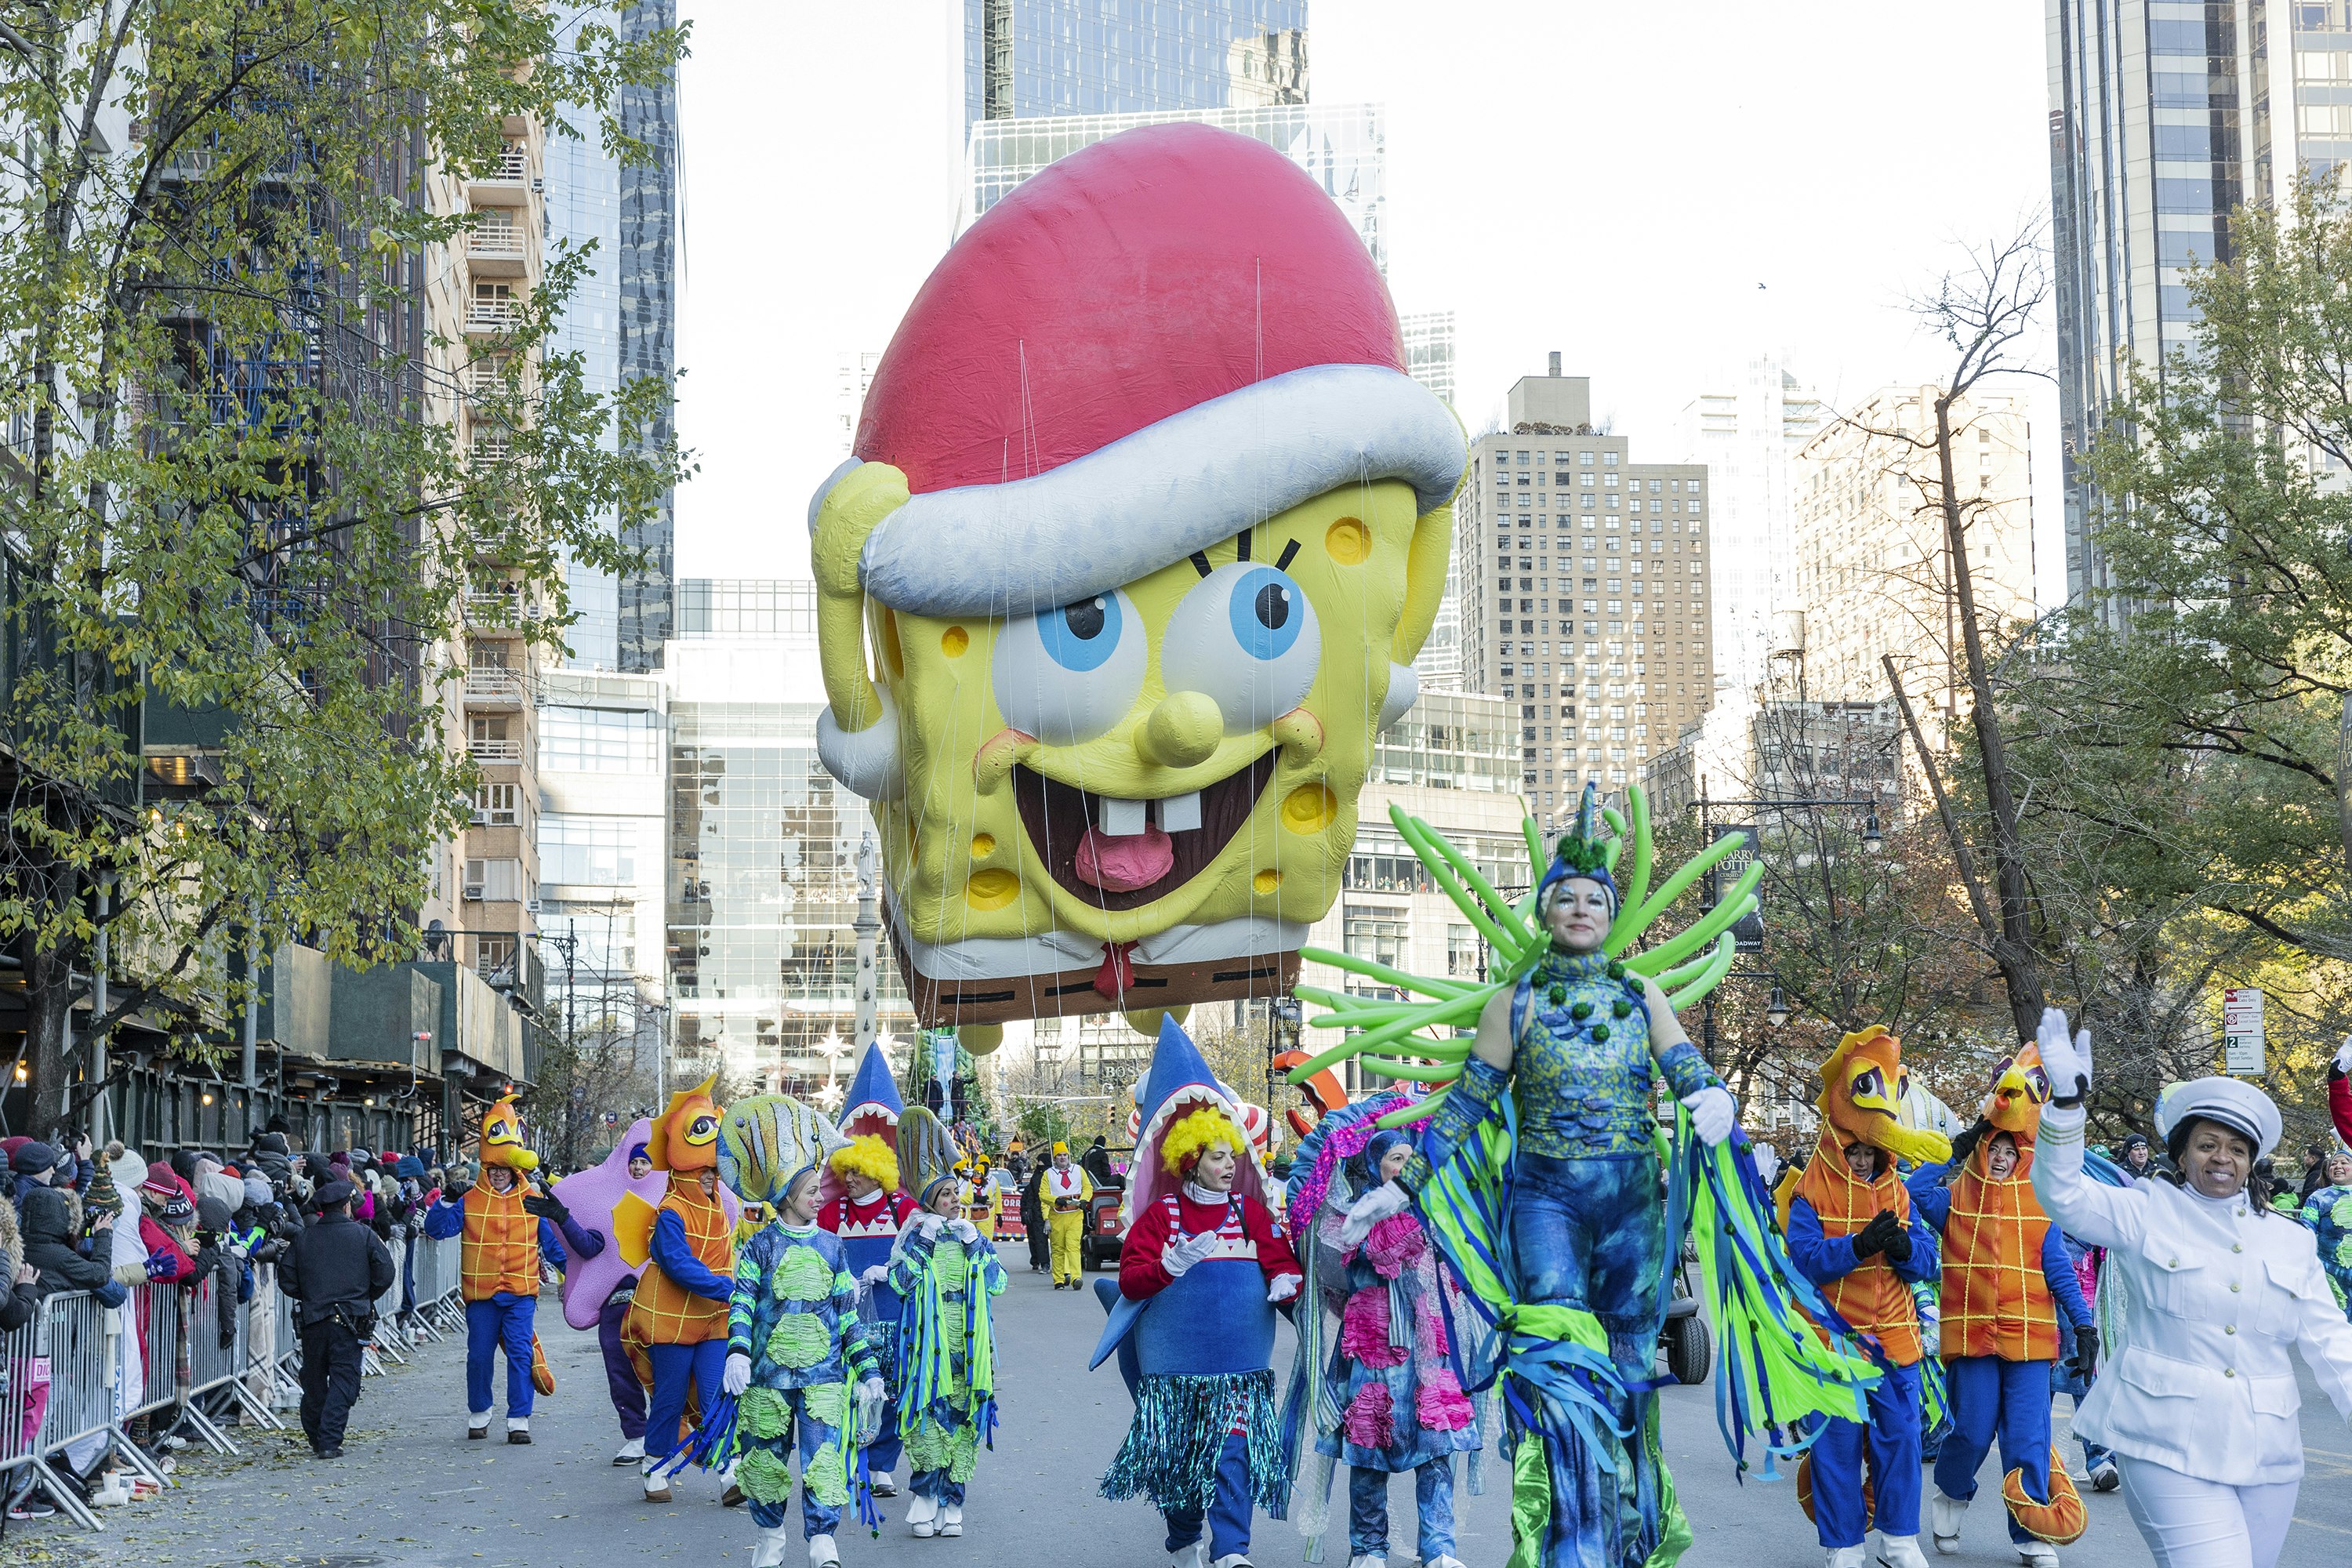 SpongeBob SquarePants giant balloon floats at 92nd Annual Macy's Thanksgiving Day Parade on the streets of Manhattan in frigid weather.